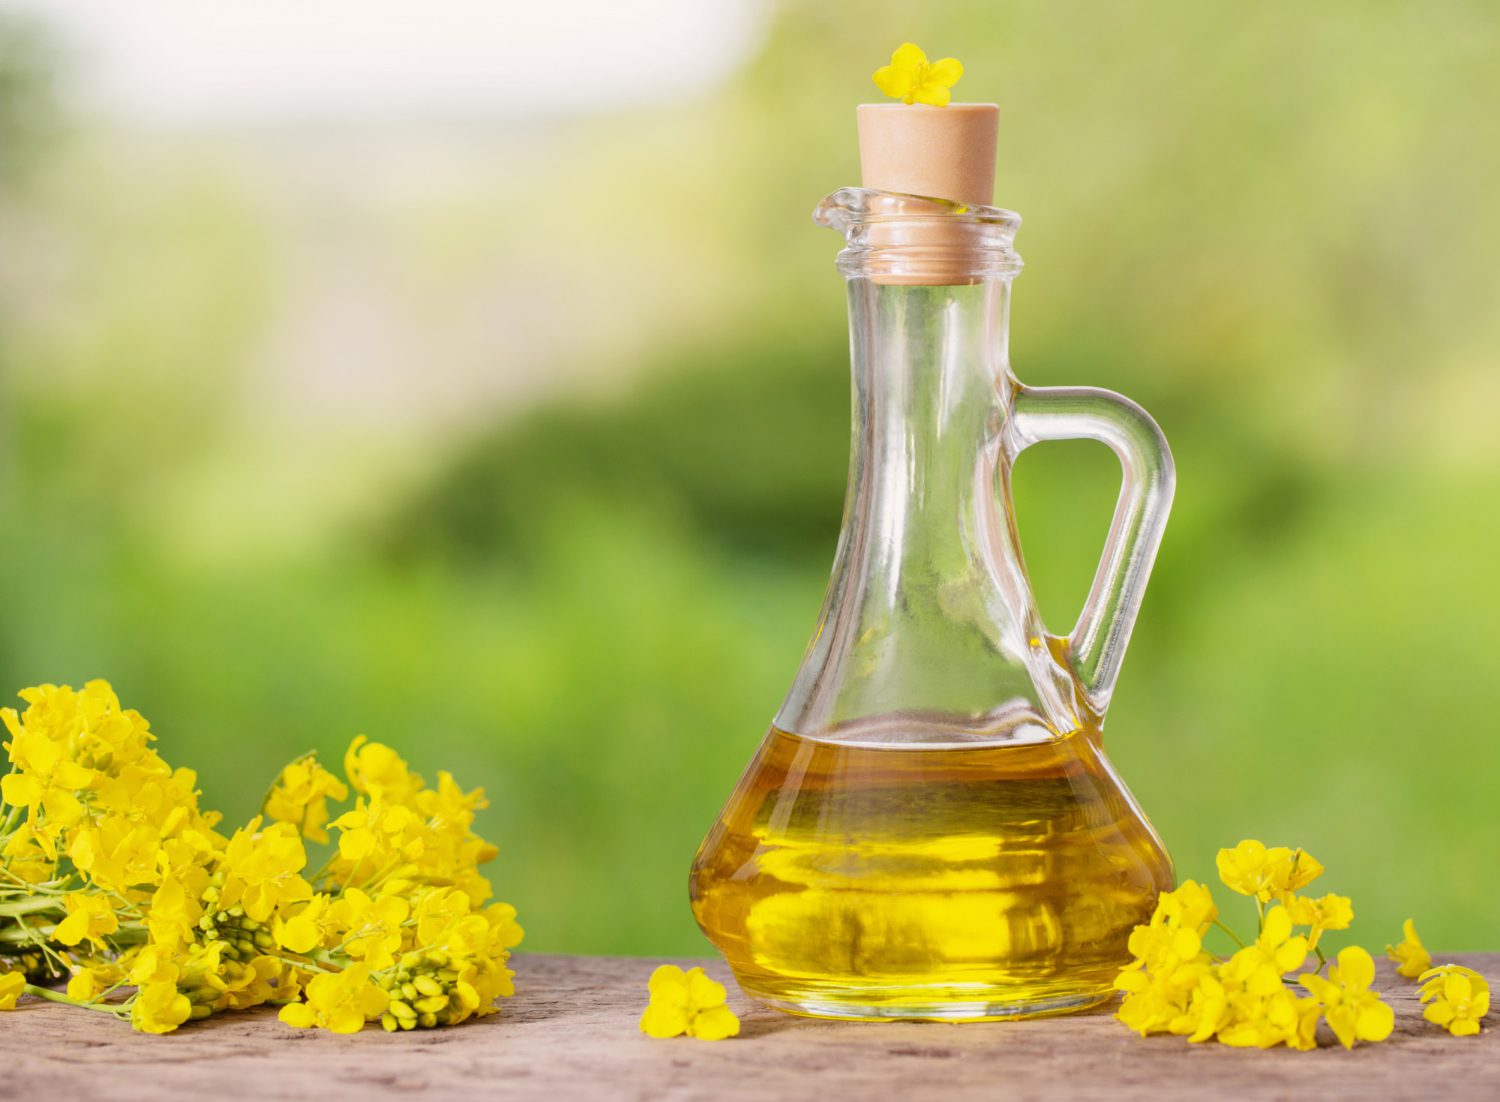 A bottle of CanolaMAX beside bright yellow canola flowers on a wooden surface with a green background.